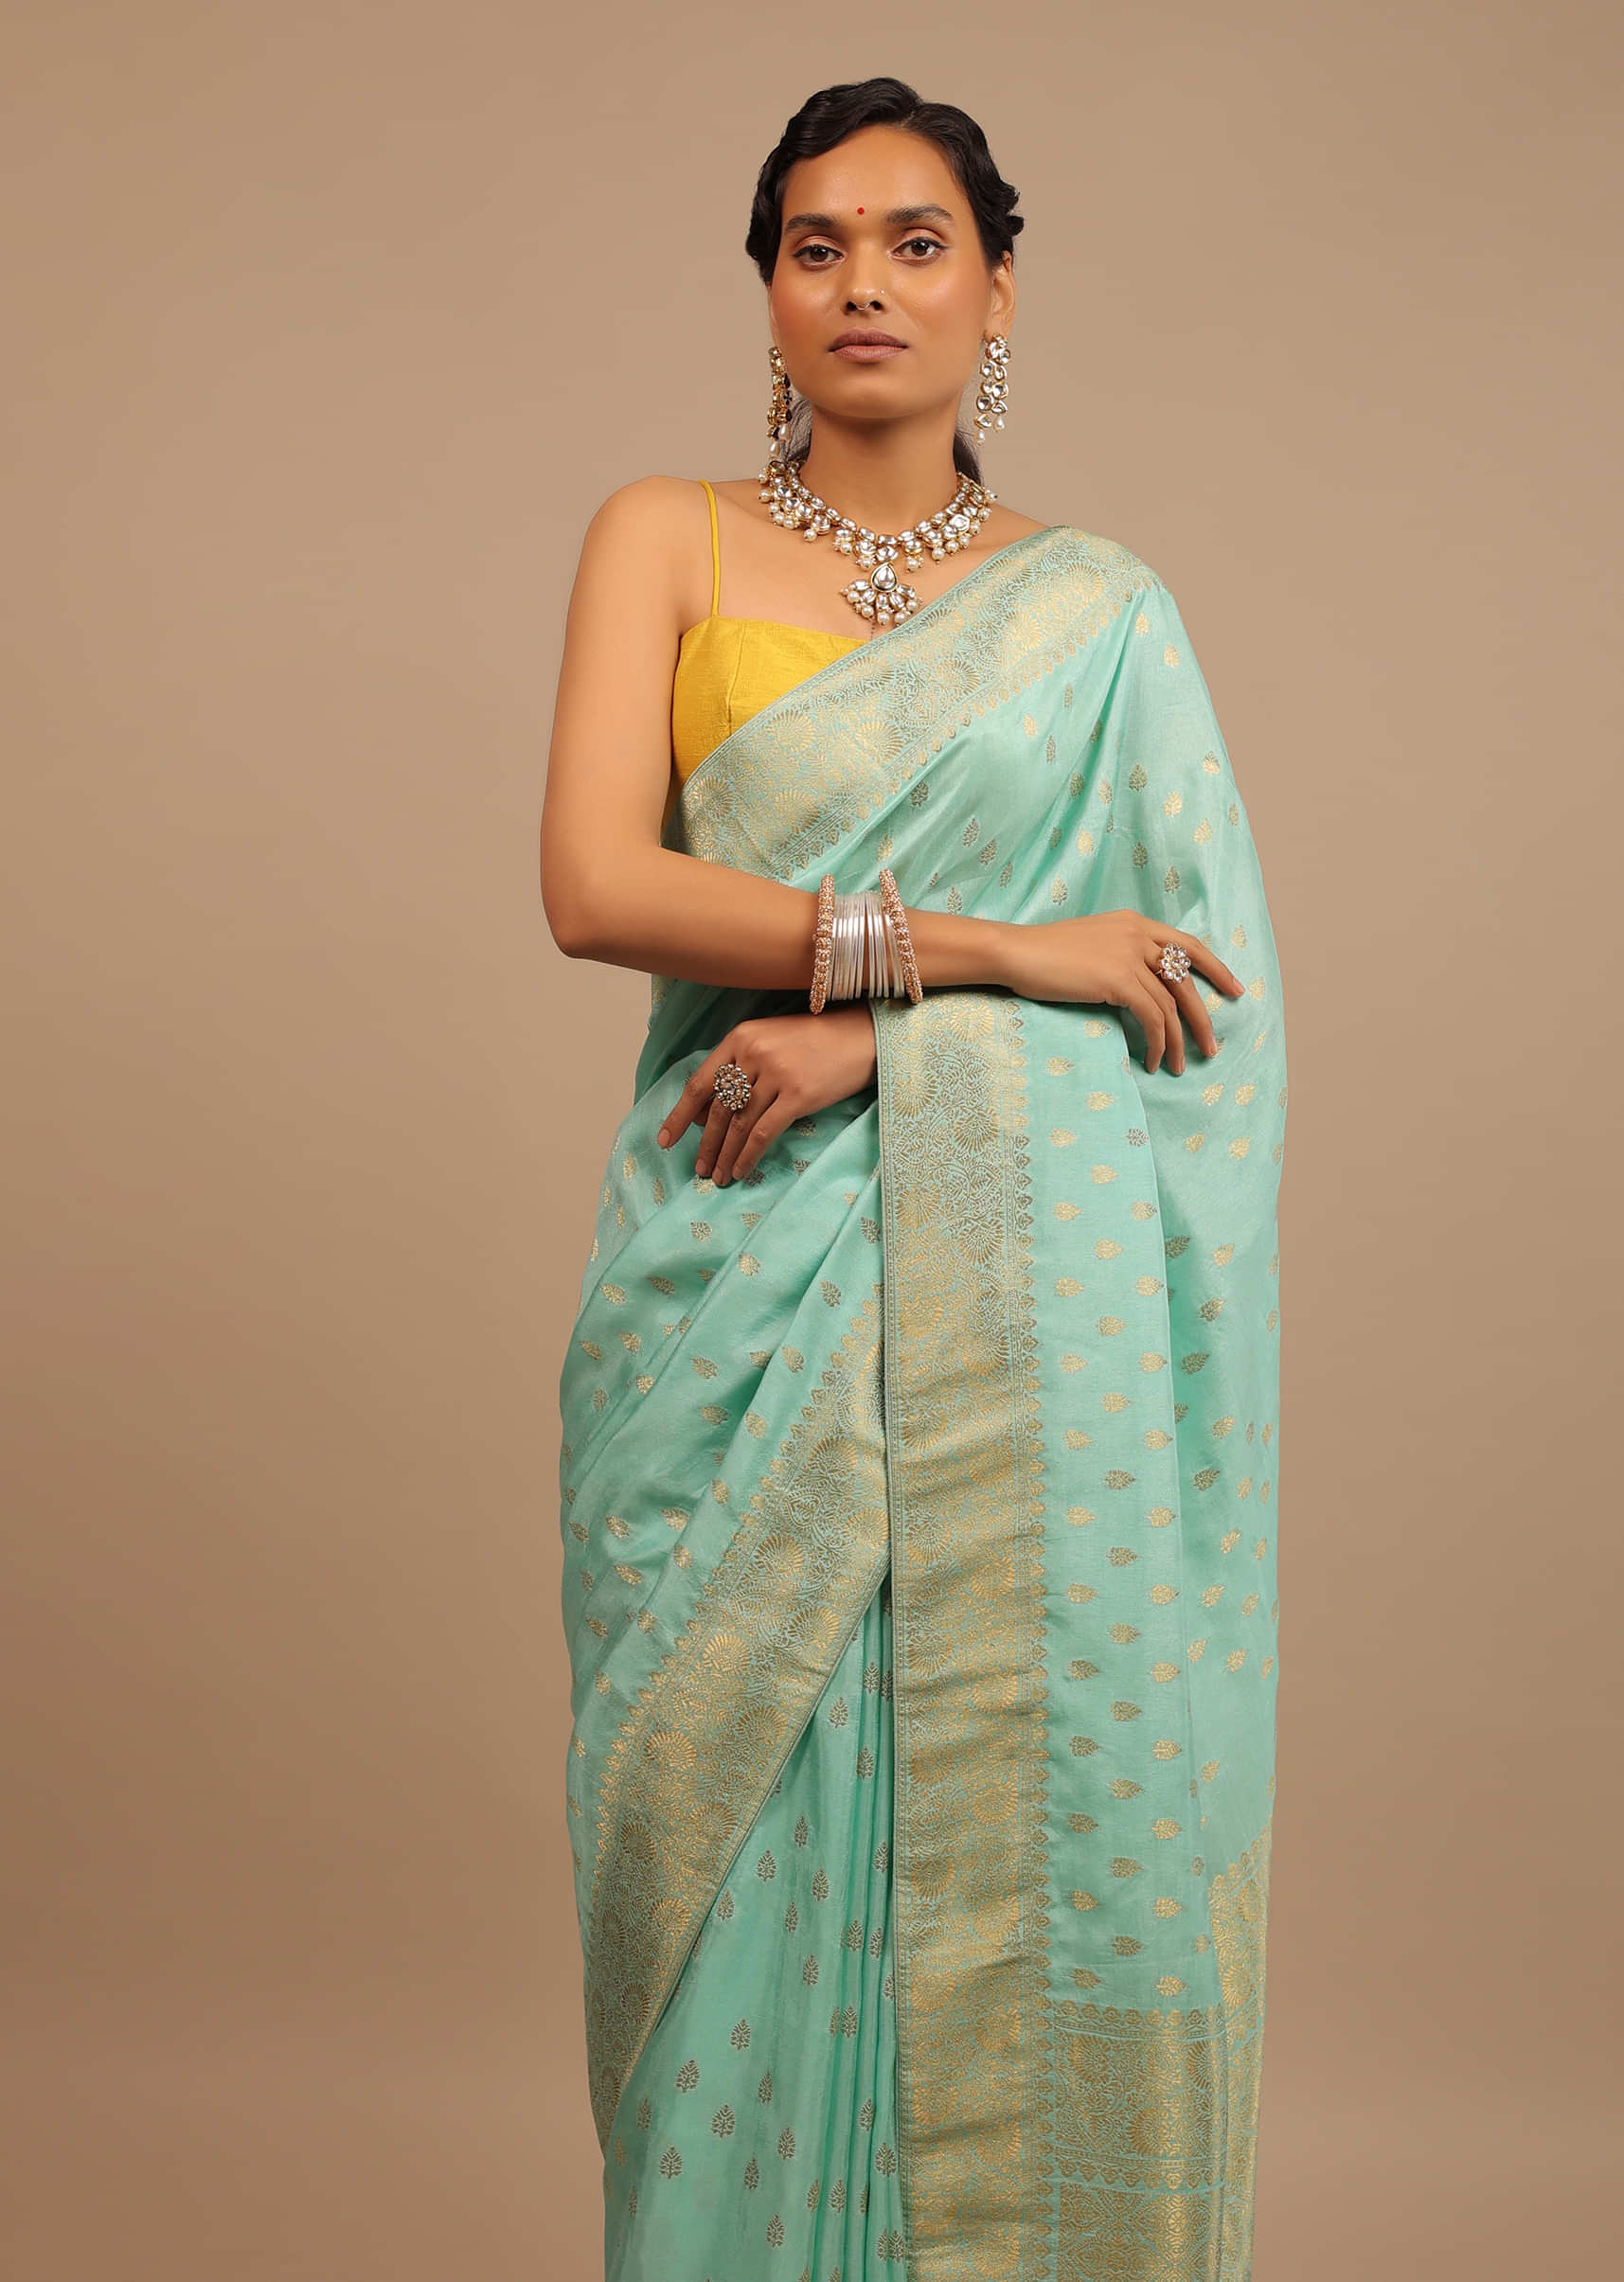 Sky Blue Saree In Dola Silk With Woven Leaf Buttis And Moroccan Weave On Pallu